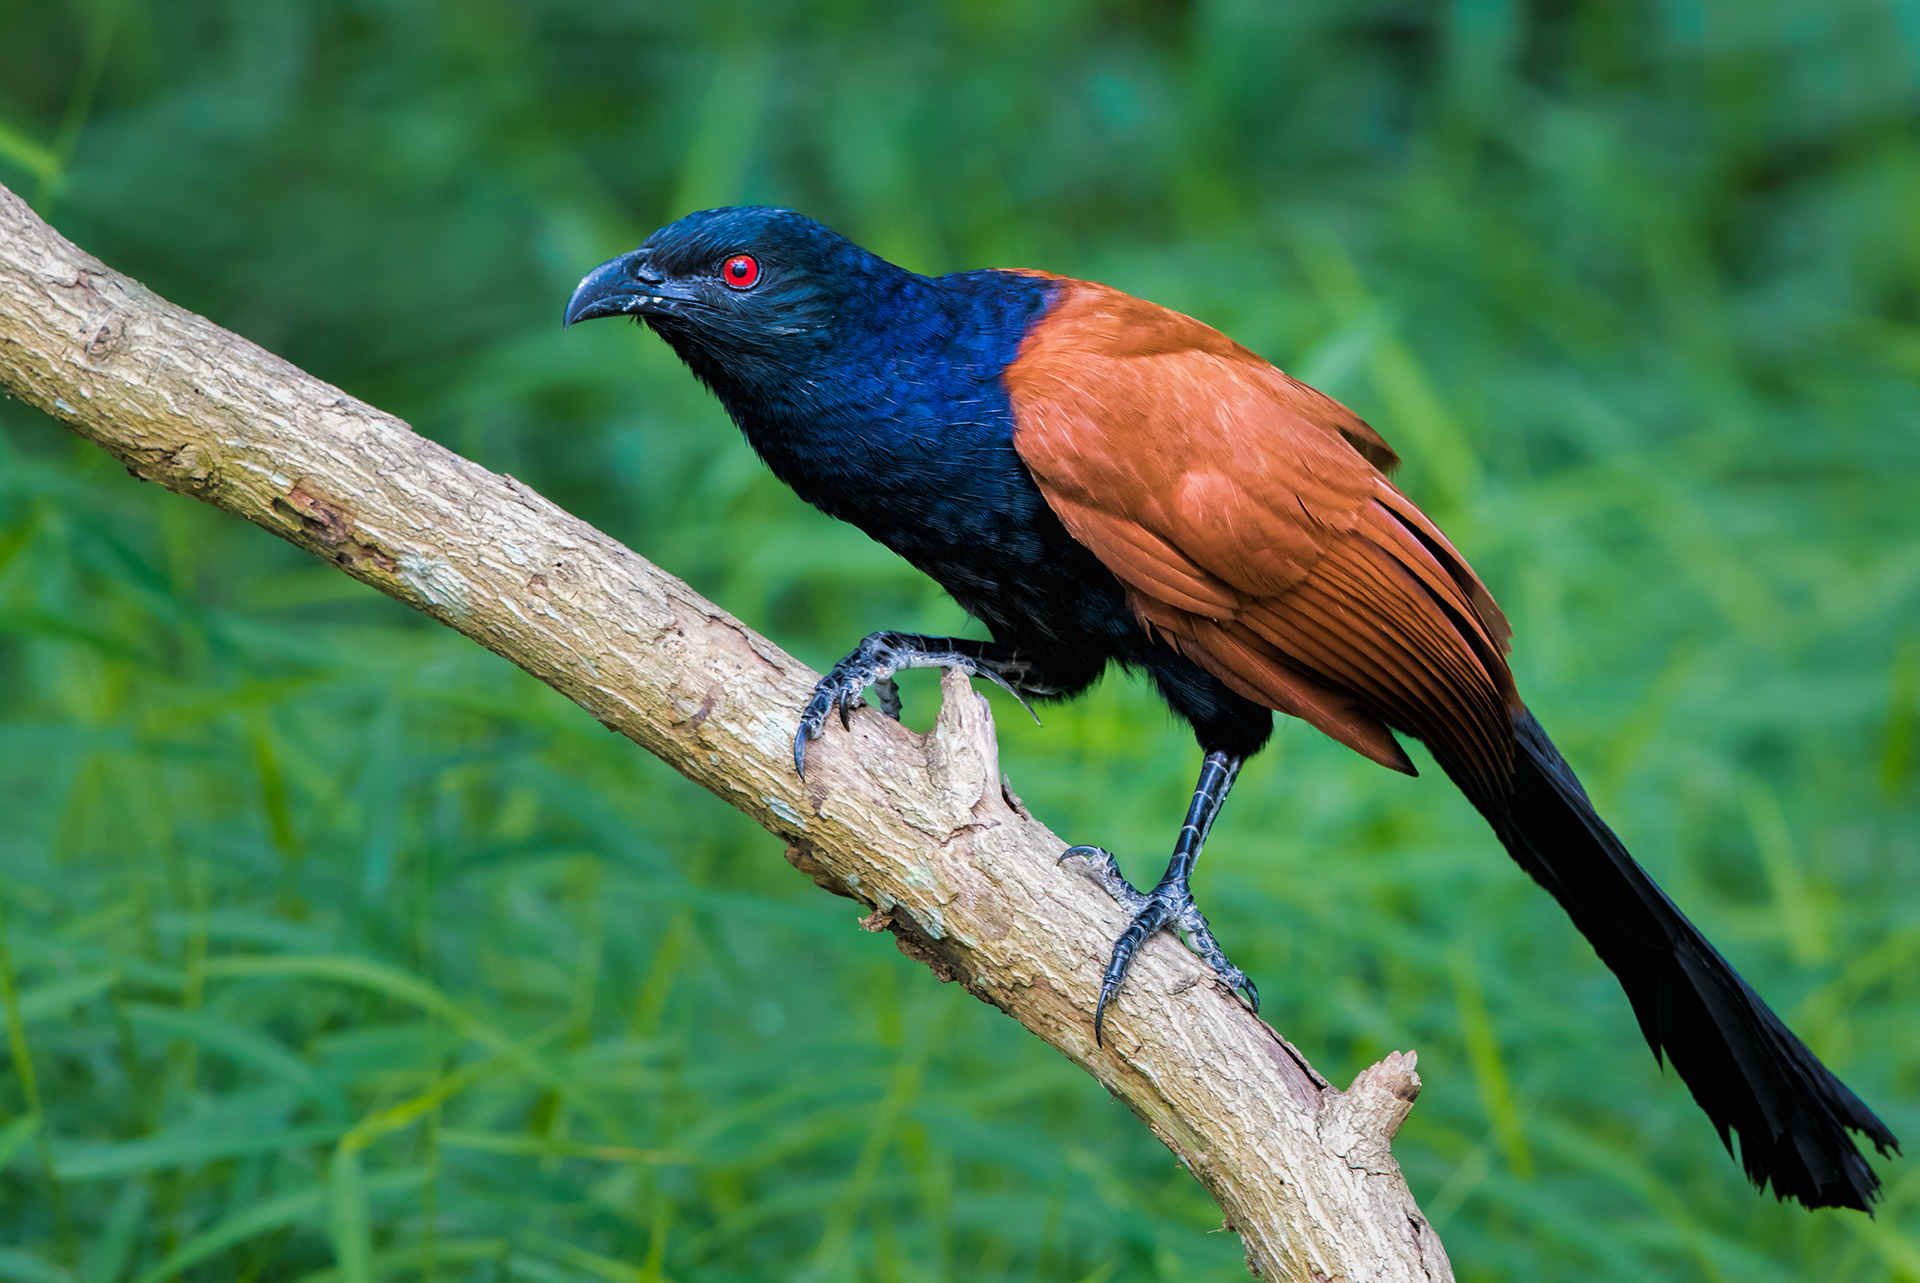 Greater coucal or crow pheasant (Centropus sinensis)